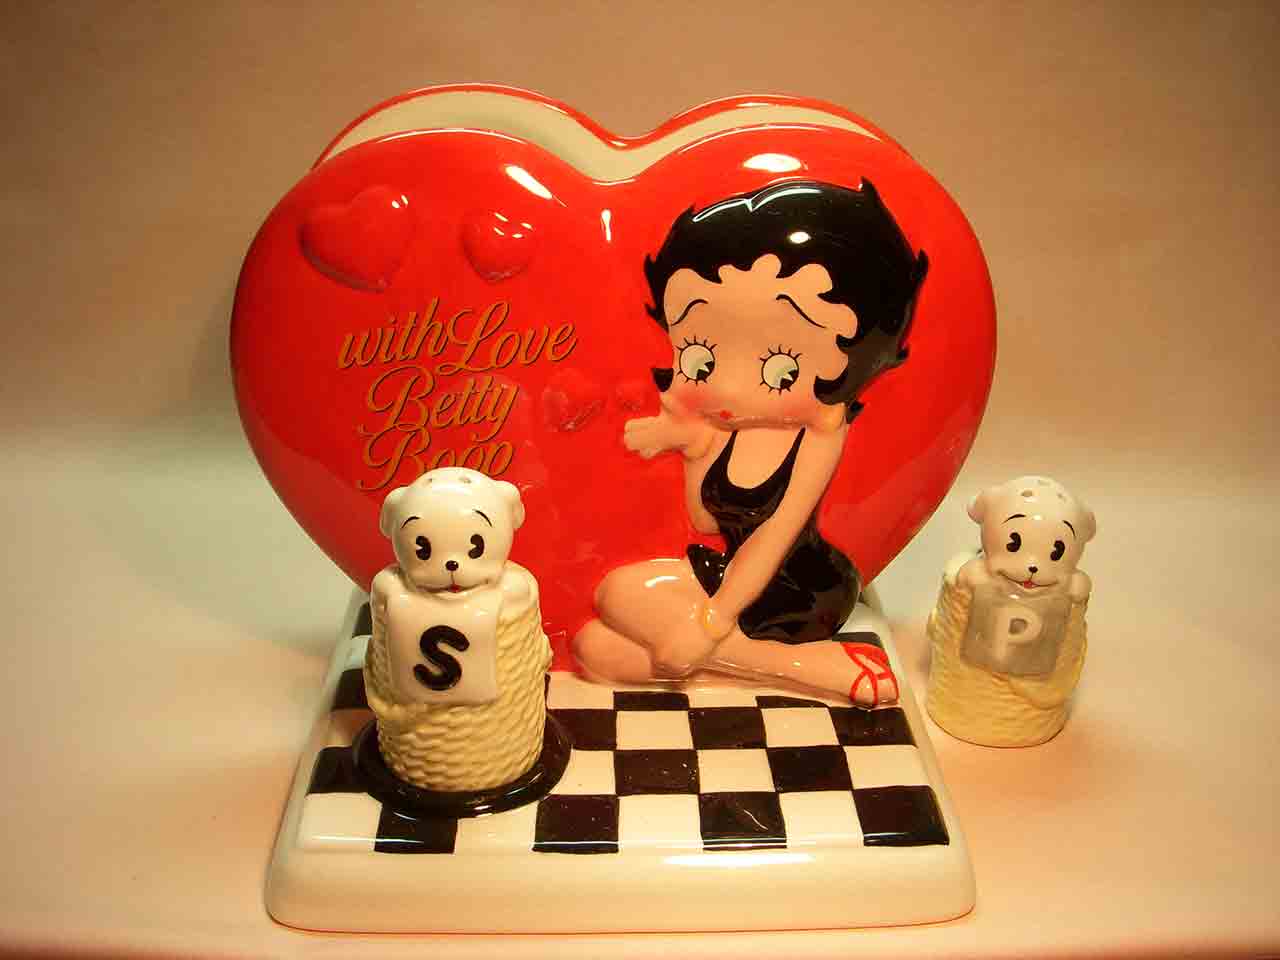 Betty Boop napkin holder and Pudgy the dog salt and pepper shaker